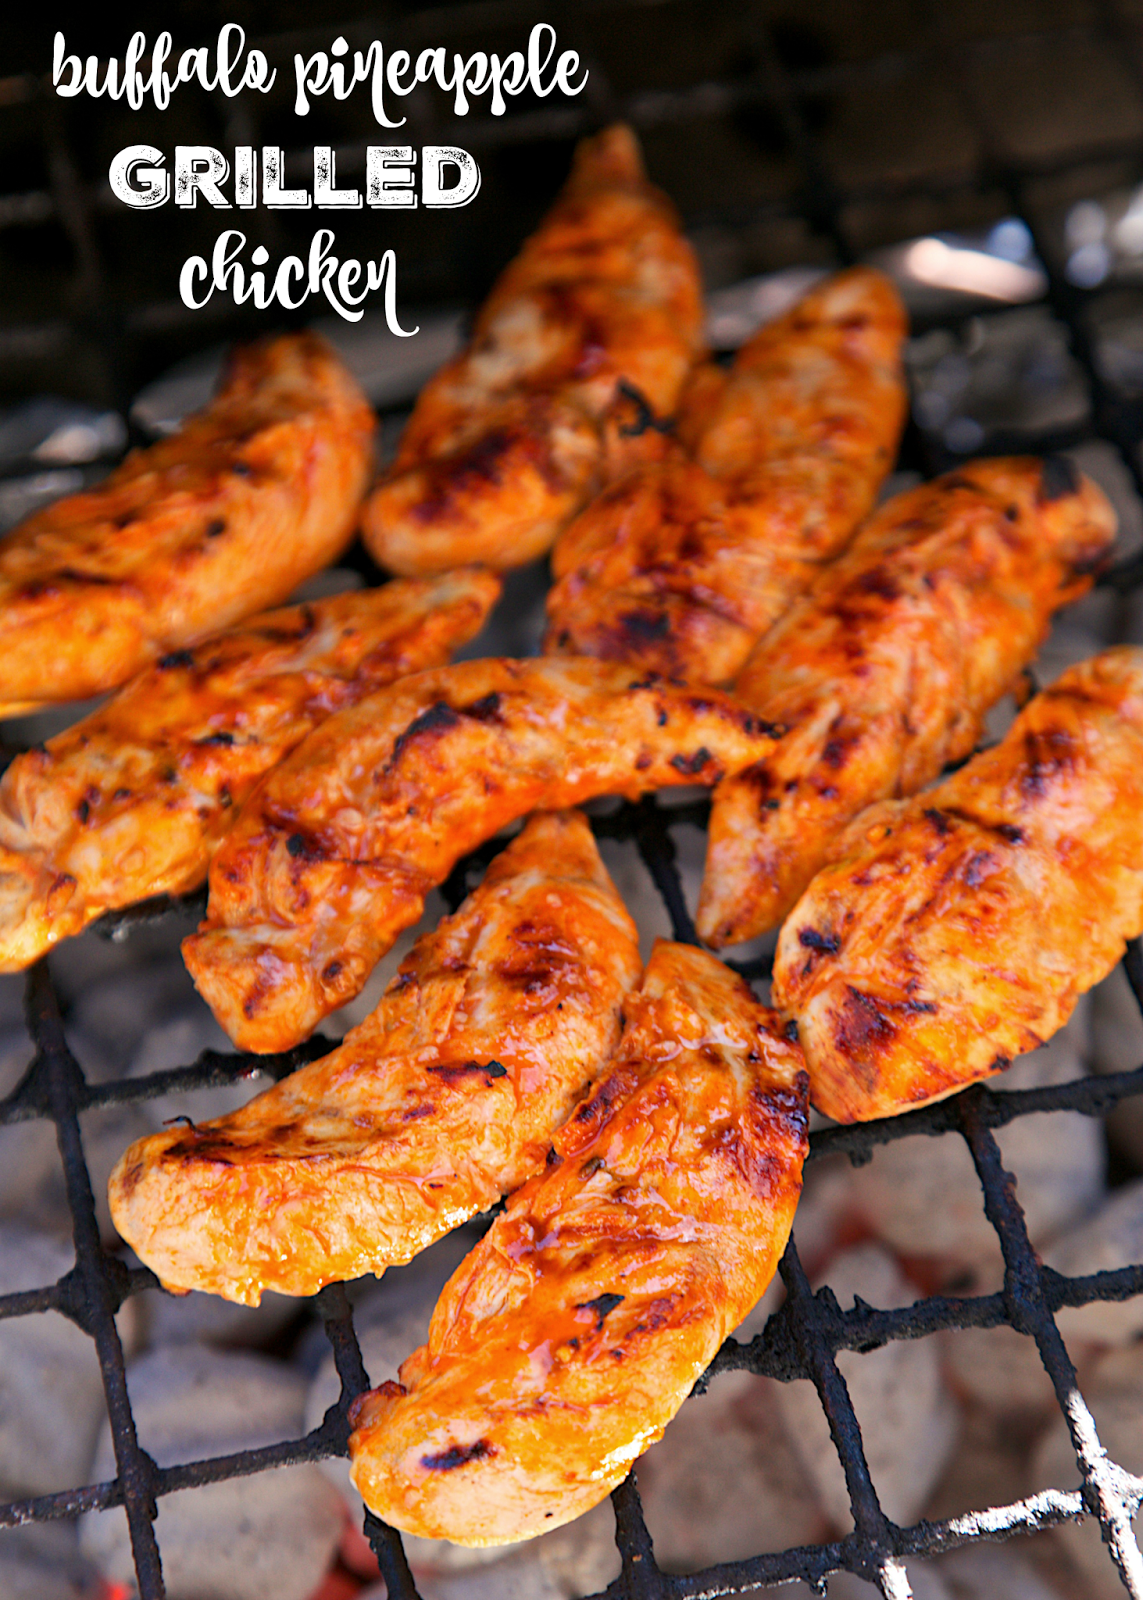 Buffalo Pineapple Chicken - chicken marinated in buffalo sauce and pineapple juice - grill, pan sear or bake for a quick weeknight meal. A little spicy, a little sweet and a whole lotta delicious! Ready to eat in 15 minutes!